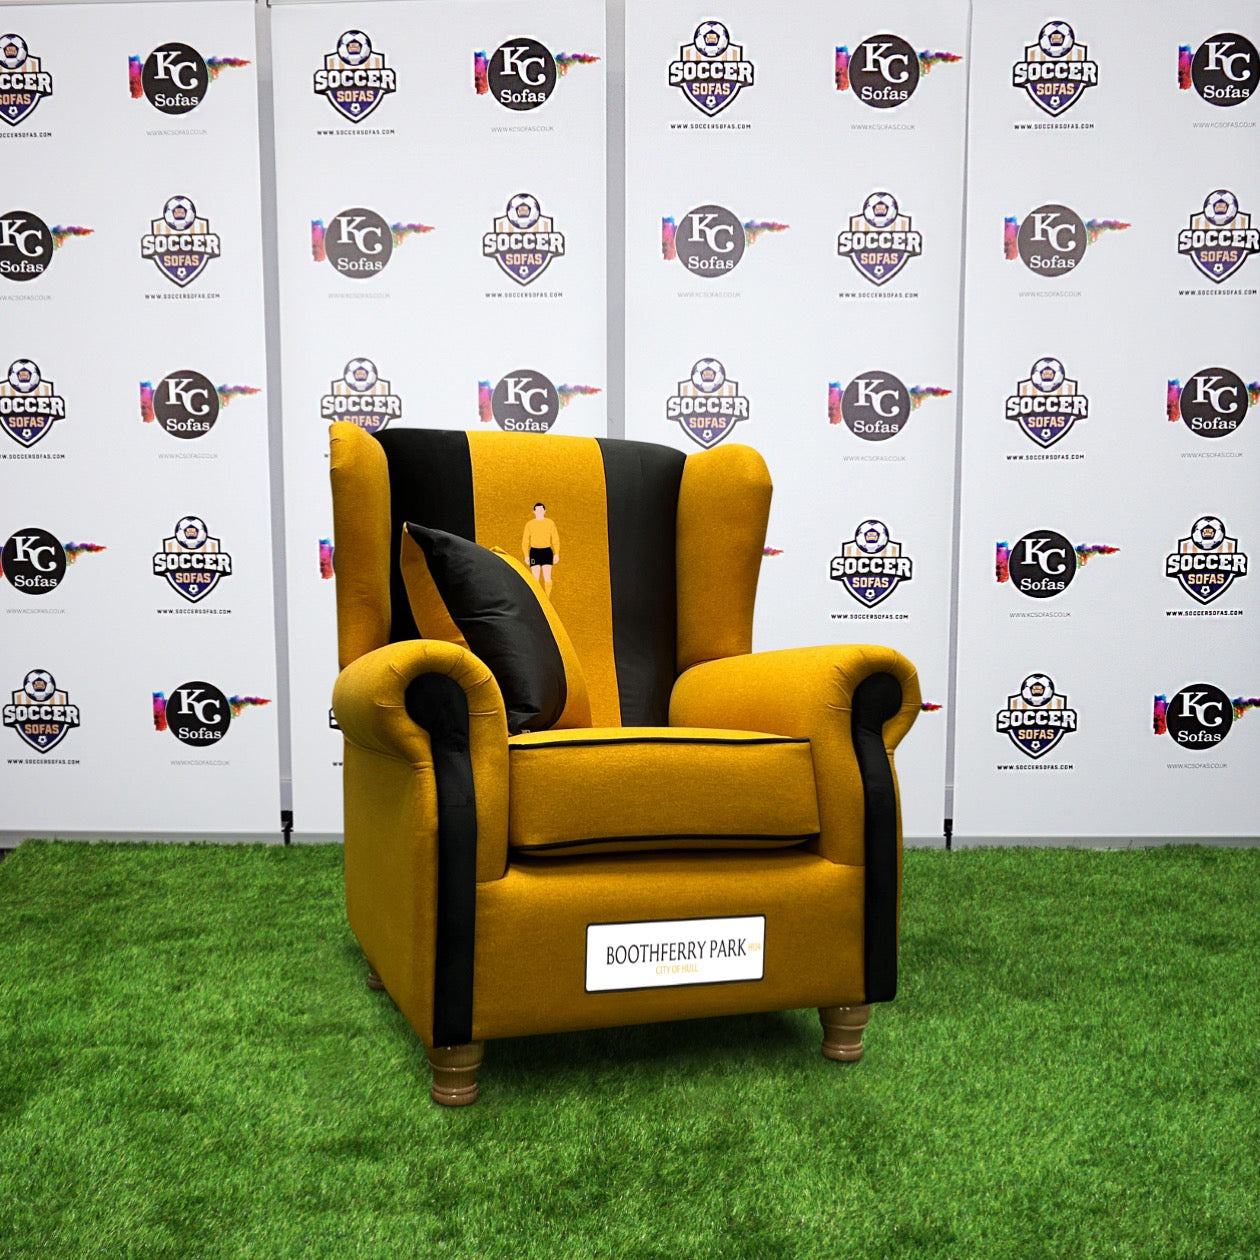 Boothferry Park Wing Chair (Hull FC)